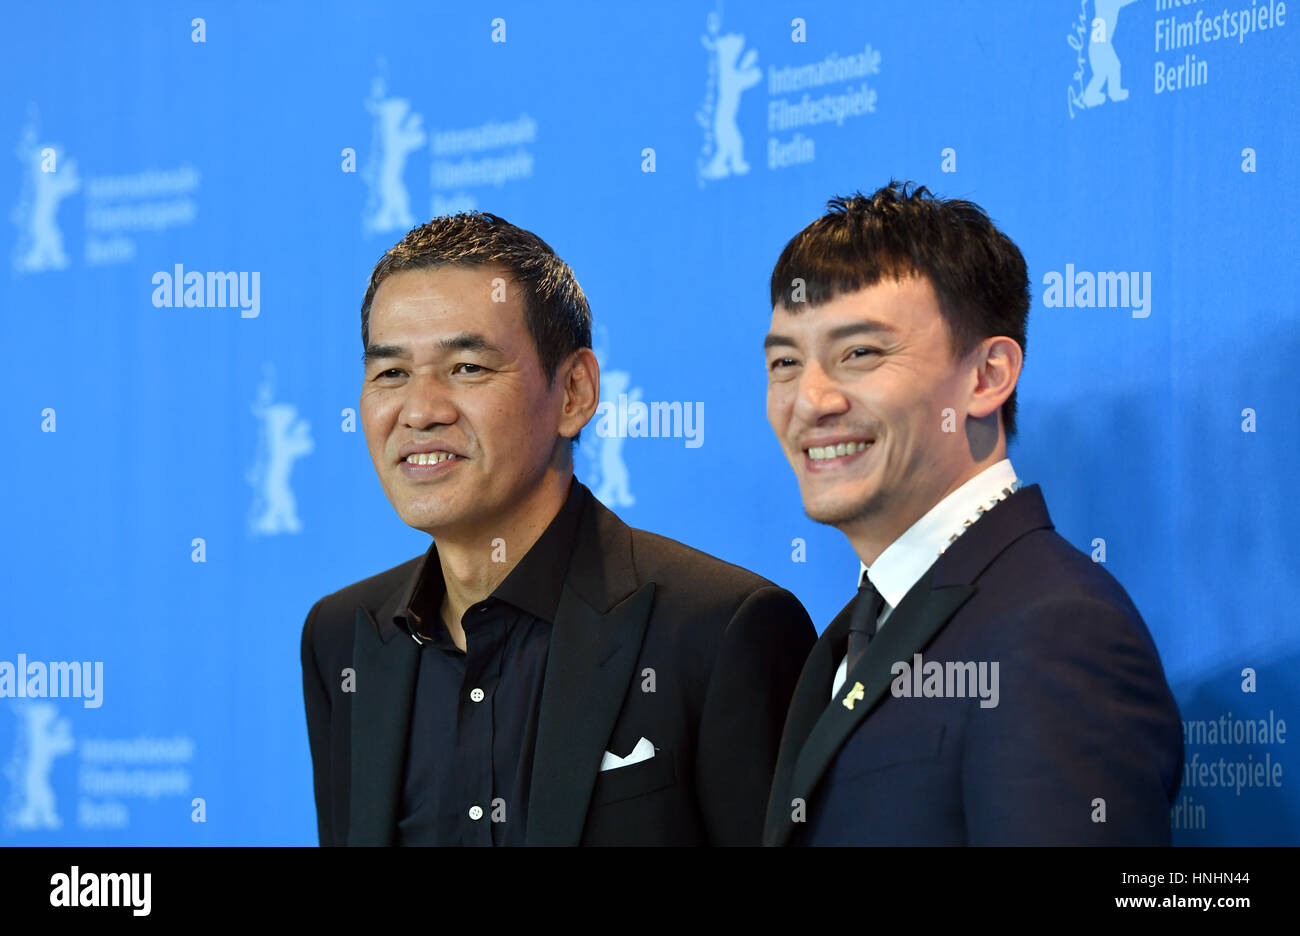 Berlin, Germany. 13th Feb, 2017. Actor Chang Chen (r) and director Sabu, photographed during the photo call for the movie 'Mr. Long' at the 67th International Berlin Film Festival in Berlin, Germany, 13 February 2017. The movie runs in competition. Photo: Jens Kalaene/dpa-Zentralbild/ZB/dpa/Alamy Live News Stock Photo